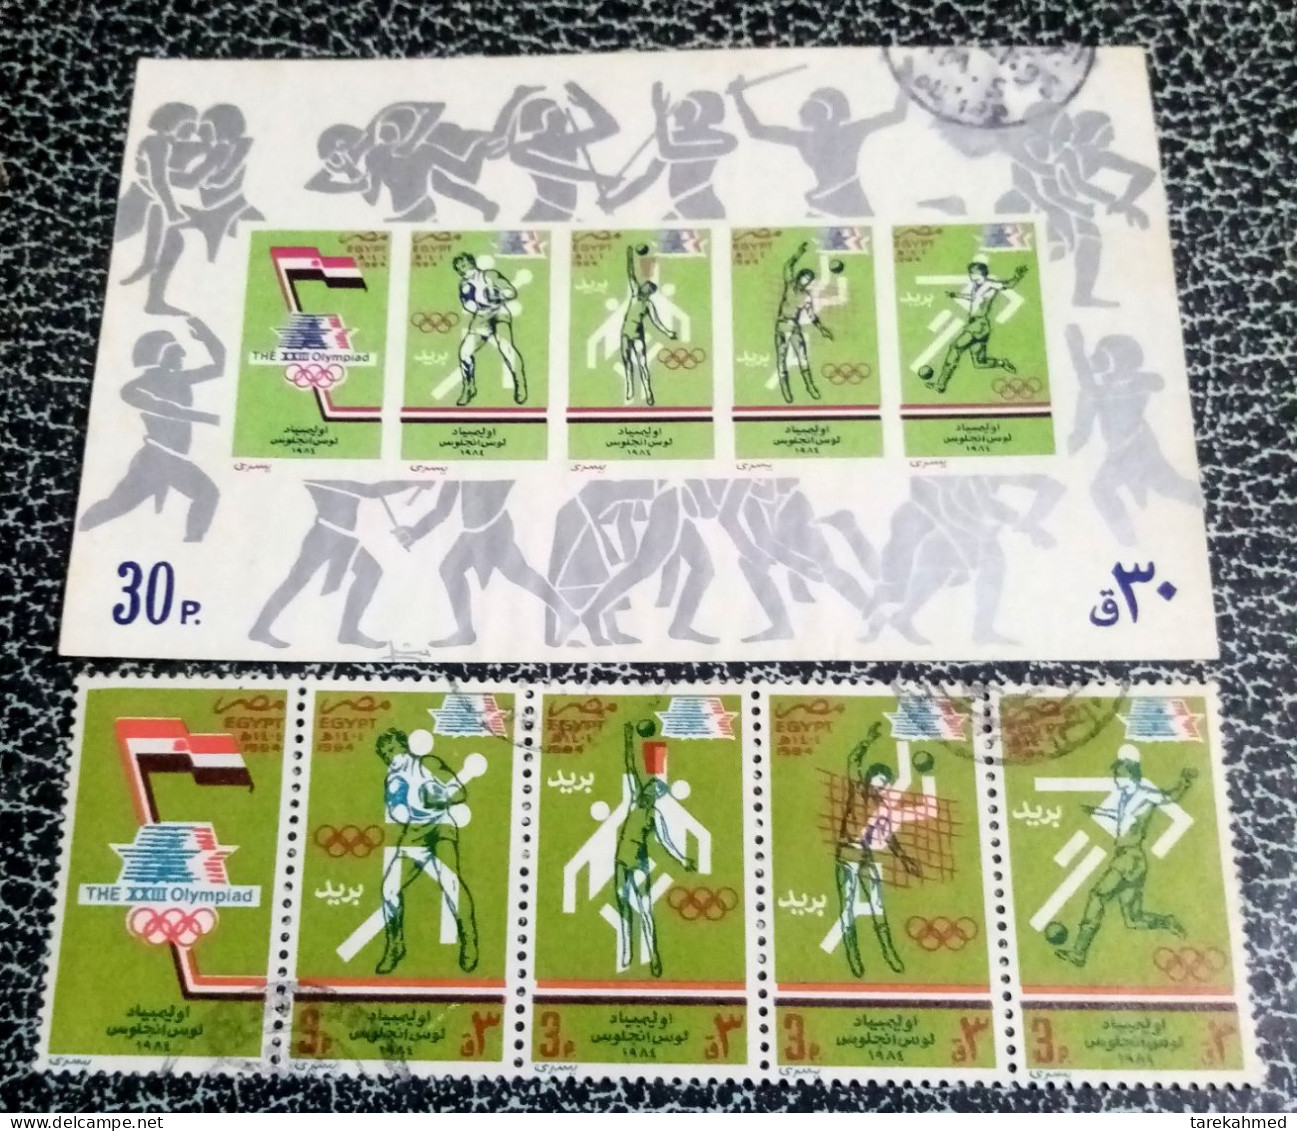 EGYPT -Complete Set Of The Olympic Games 1984-Los Angeles Olympics With The Souvenir Sheet, VF - Gebruikt